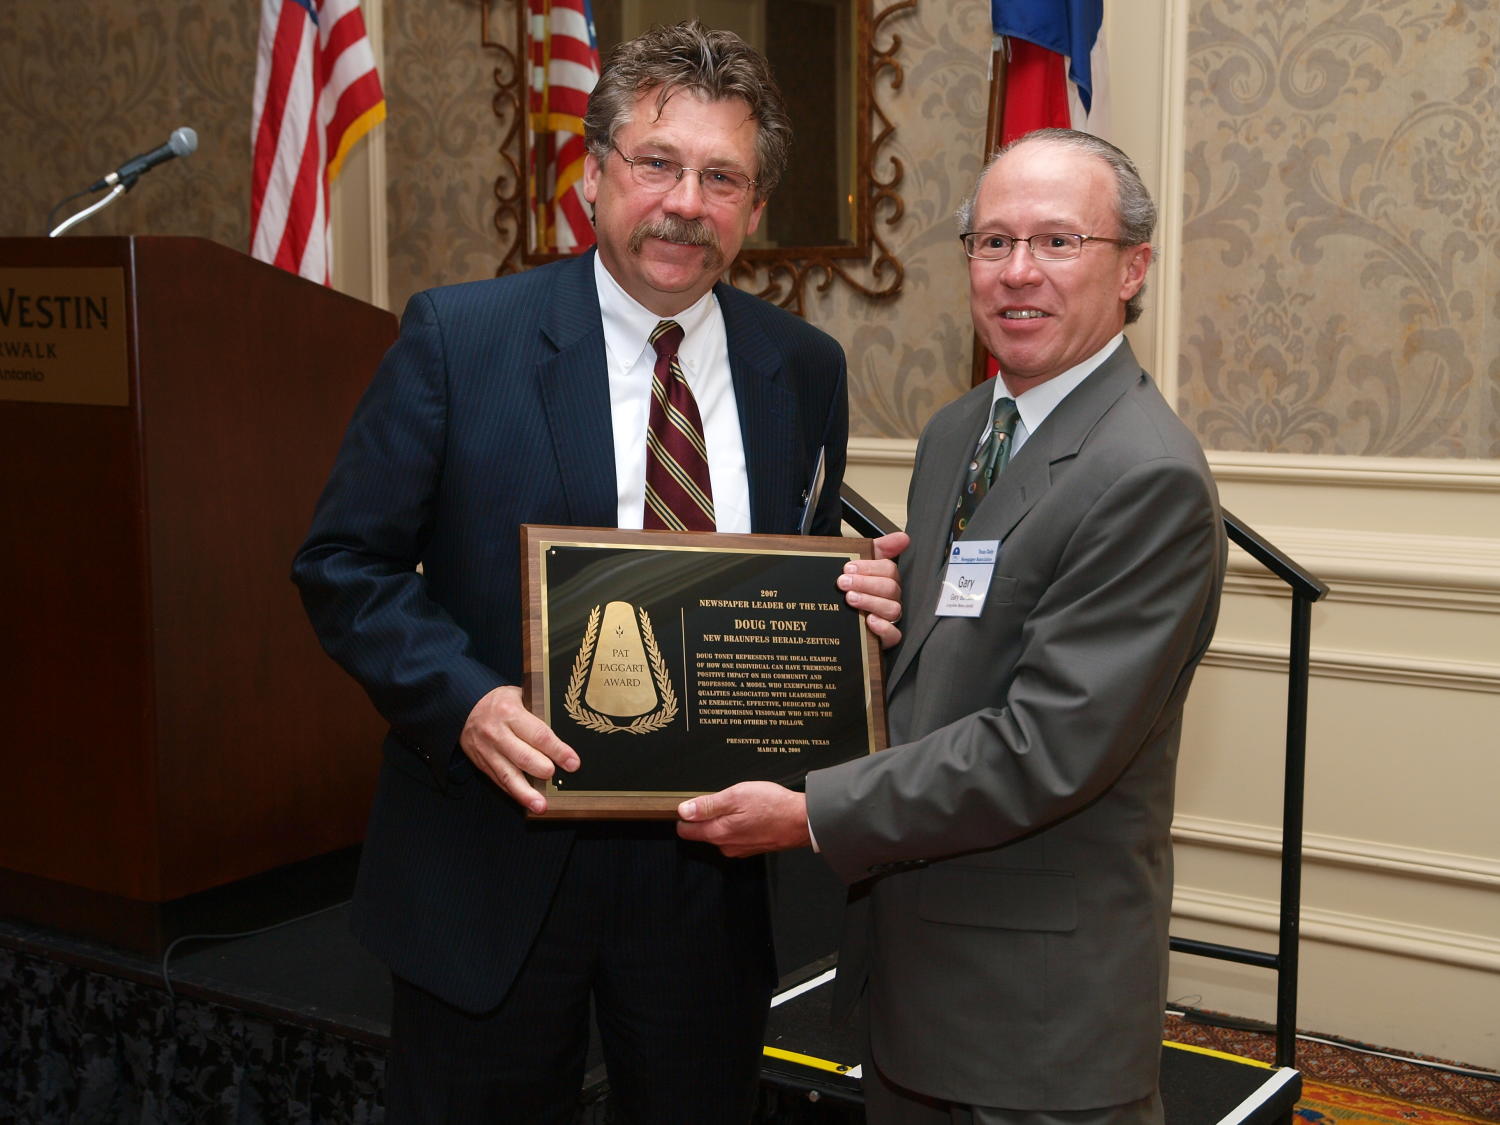 [Doug Toney and Gary Borders], Photograph of Doug Toney (left) receiving an award from Gary Borders during the award ceremony at the 2008 Texas Daily Newspaper Association annual conference awards dinner, held at The Westin Riverwalk Hotel in San Antonio, Texas., 